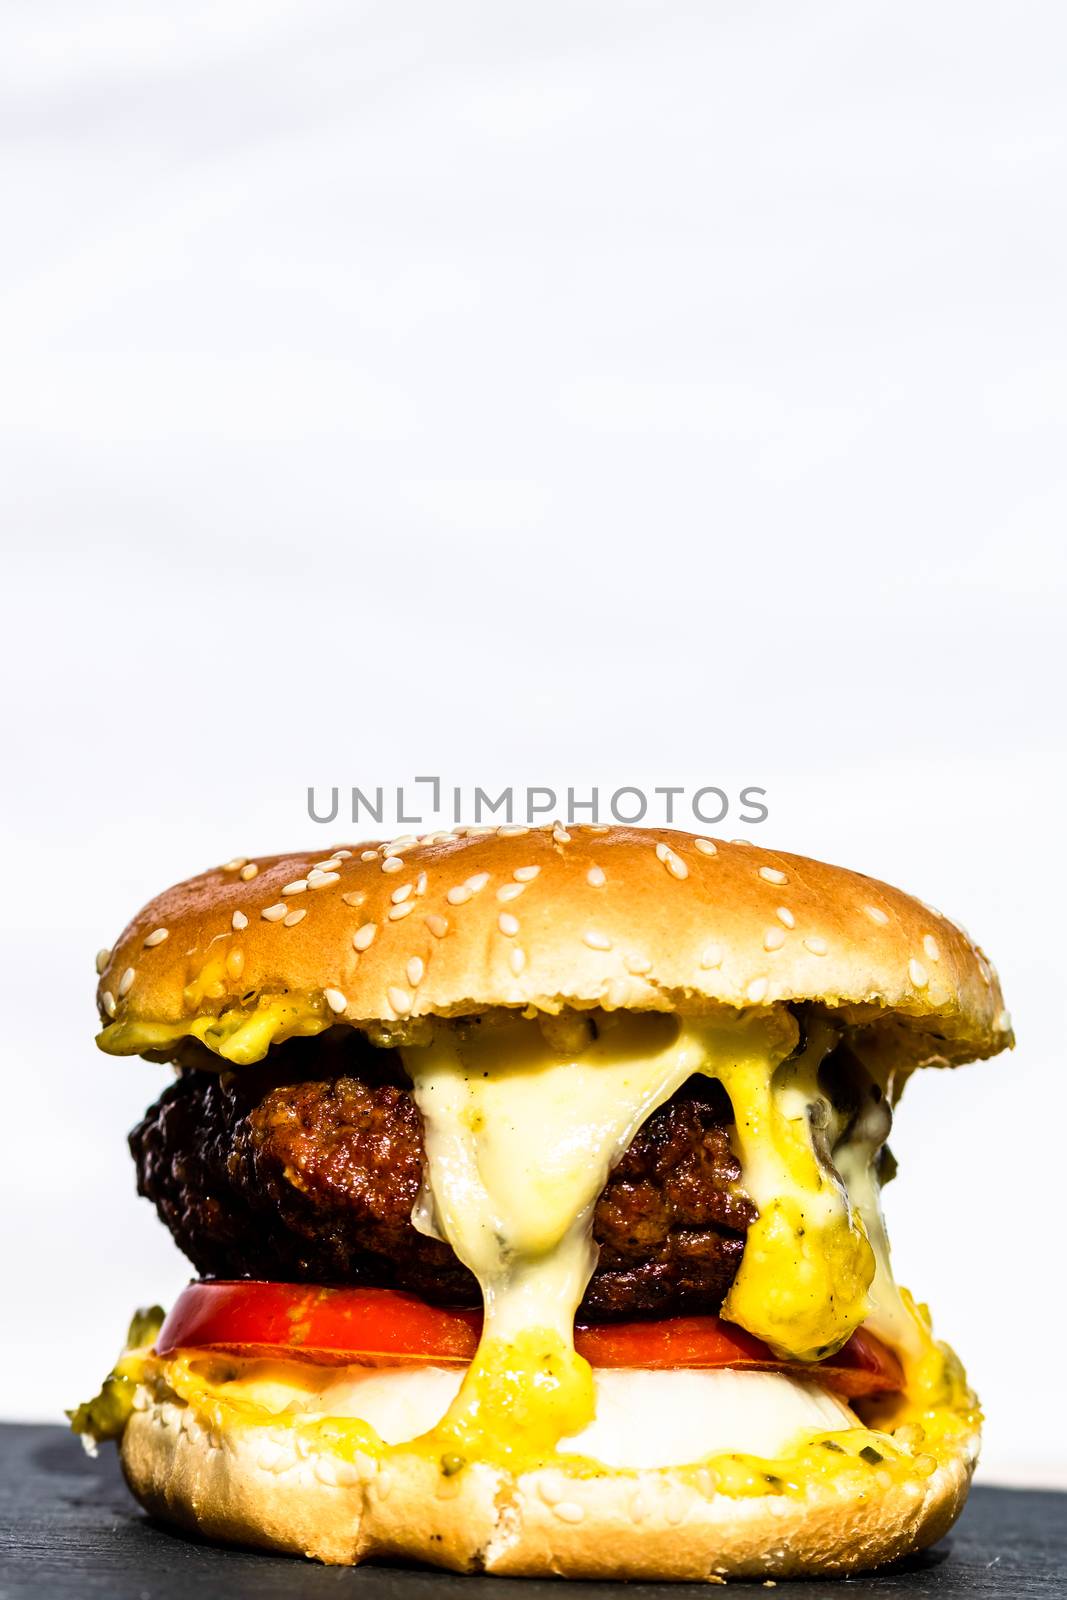 Beef cheeseburger with melting cheese. Tasty homemade cheeseburger isolated on white background.